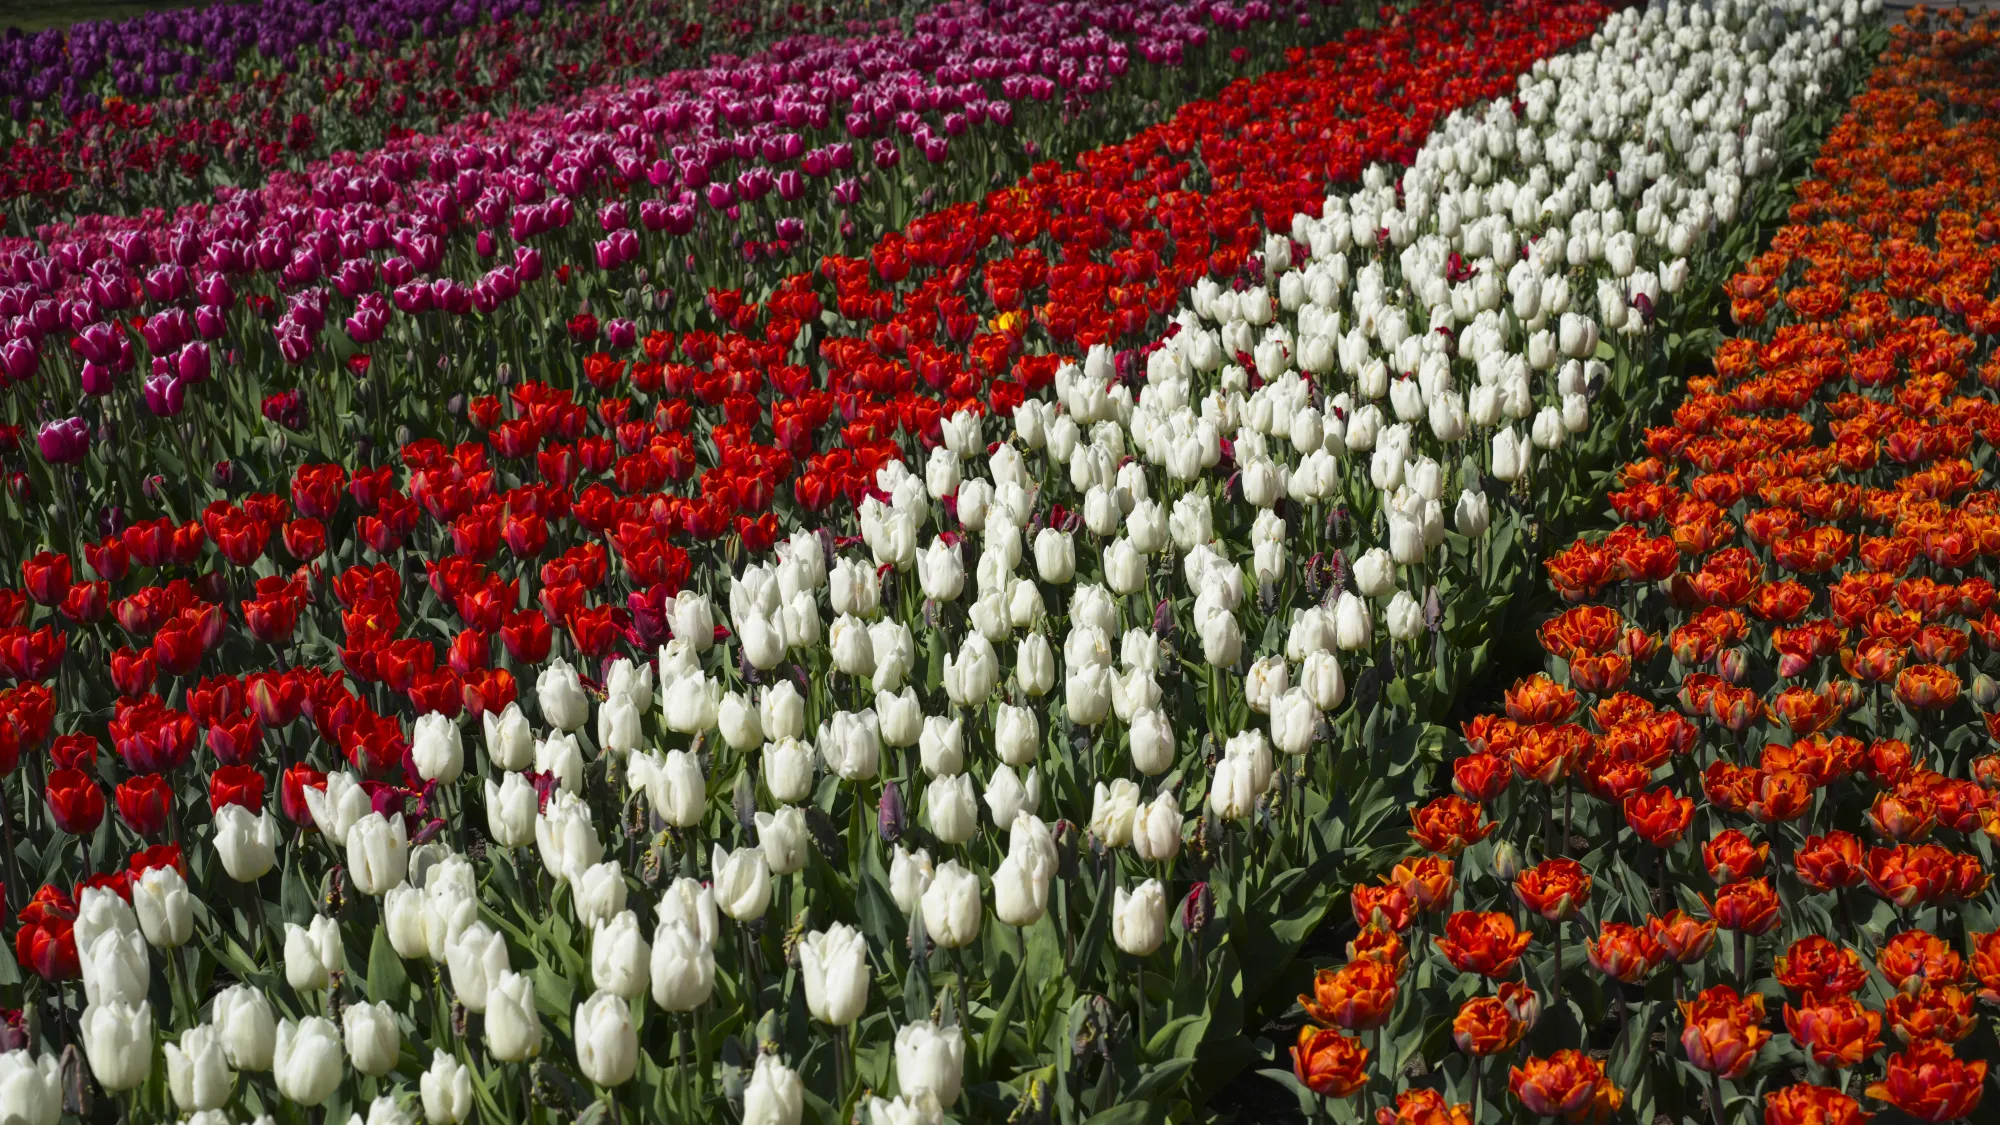 Rows of different colored tulips